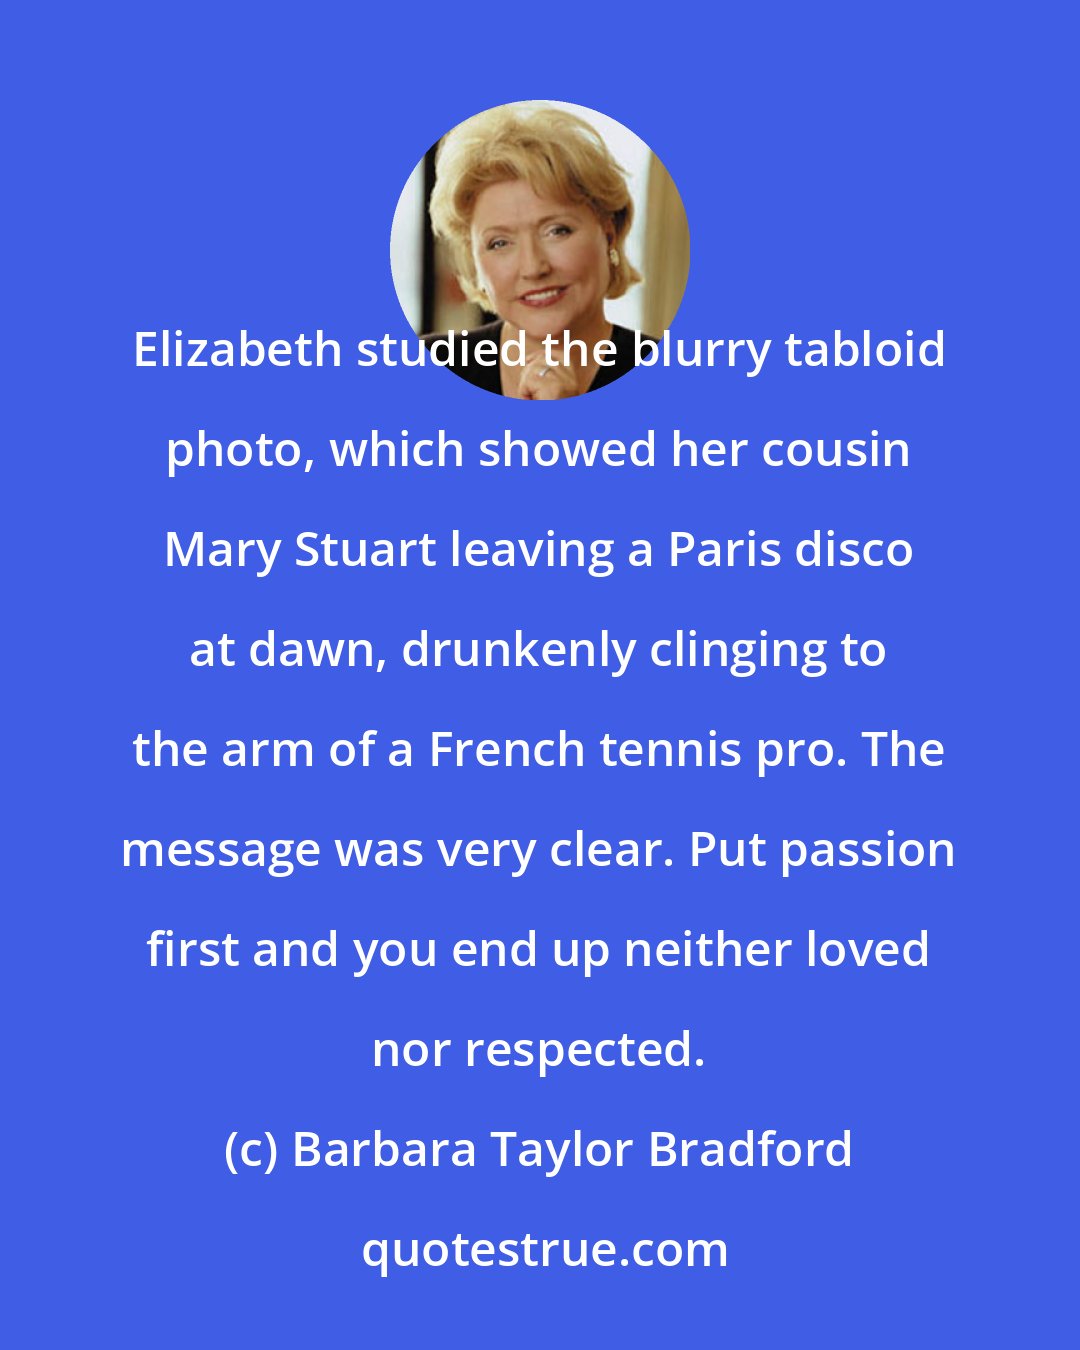 Barbara Taylor Bradford: Elizabeth studied the blurry tabloid photo, which showed her cousin Mary Stuart leaving a Paris disco at dawn, drunkenly clinging to the arm of a French tennis pro. The message was very clear. Put passion first and you end up neither loved nor respected.